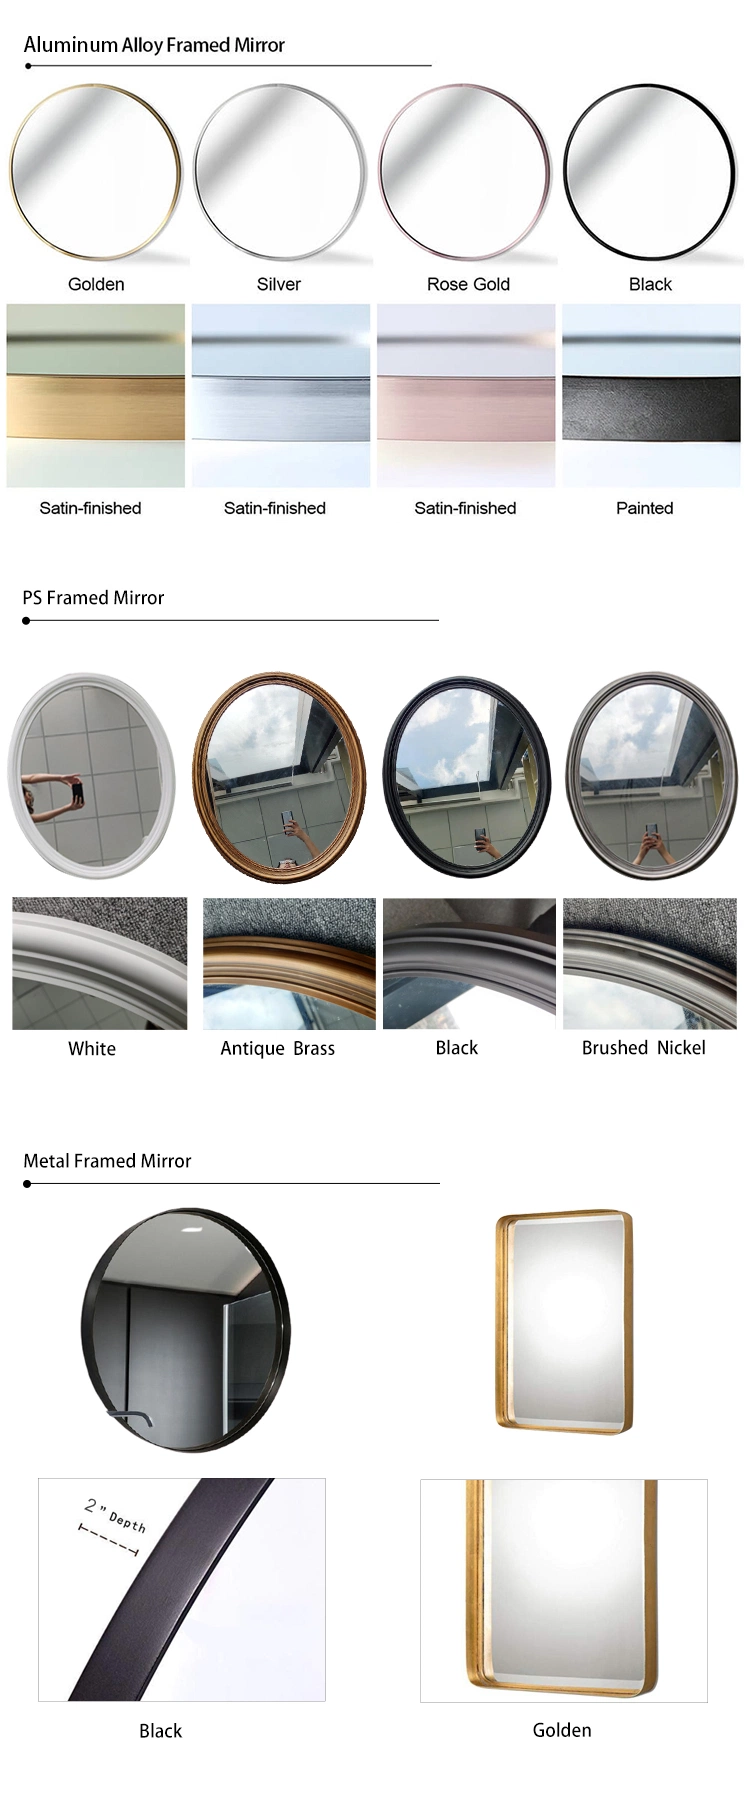 Designer Mirrors Decorative Framed Mirrors Wall Magnified Jh Glass New Products Wood Framed Mirrors